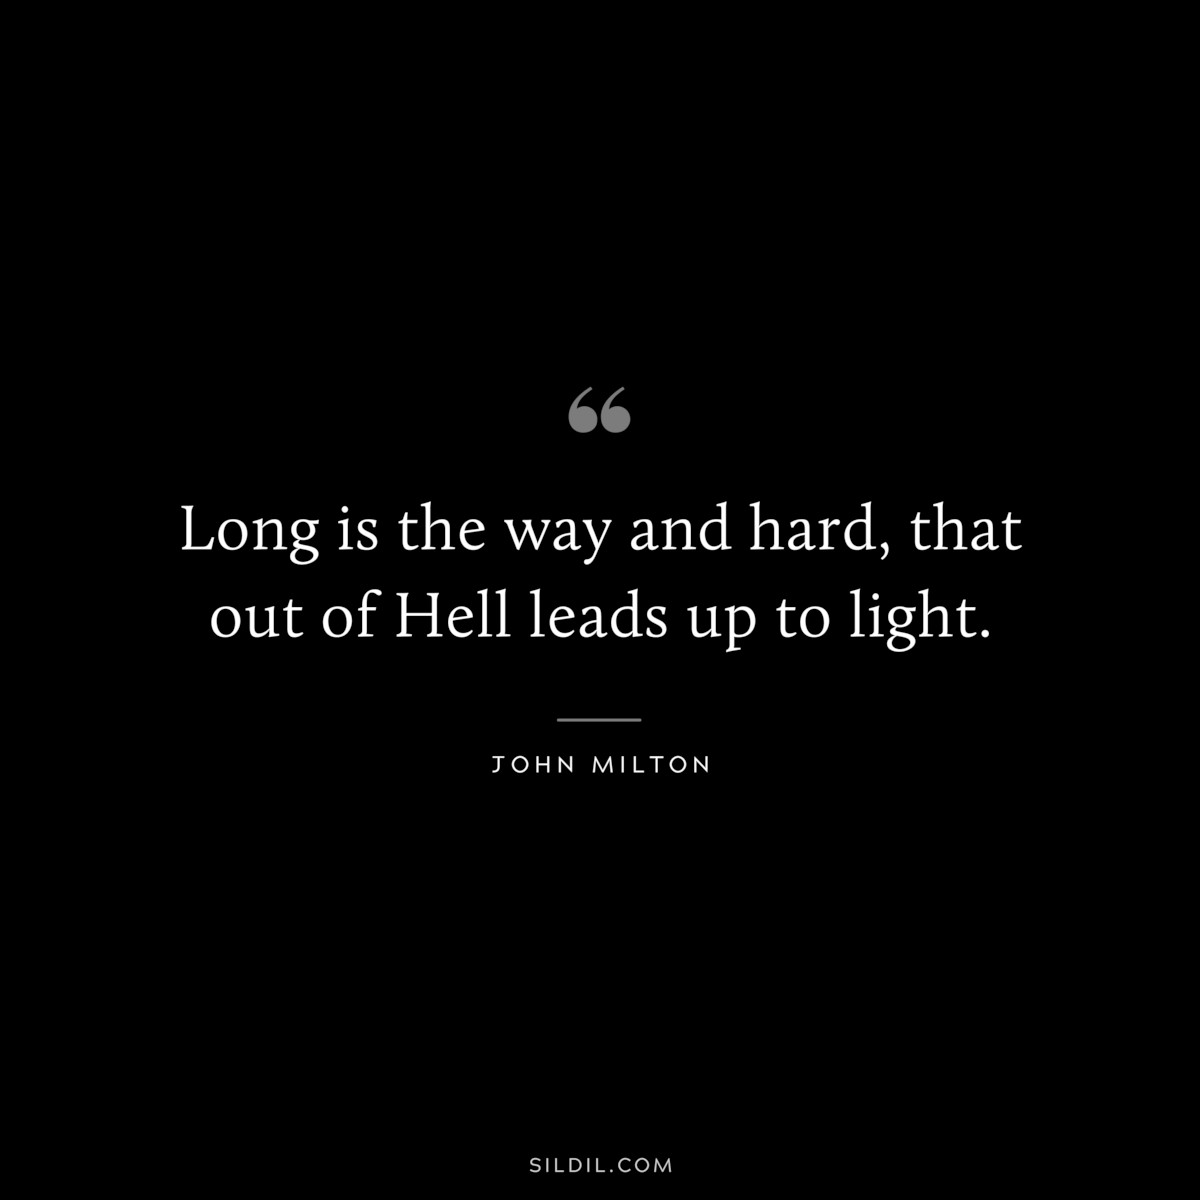 Long is the way and hard, that out of Hell leads up to light. ― John Milton